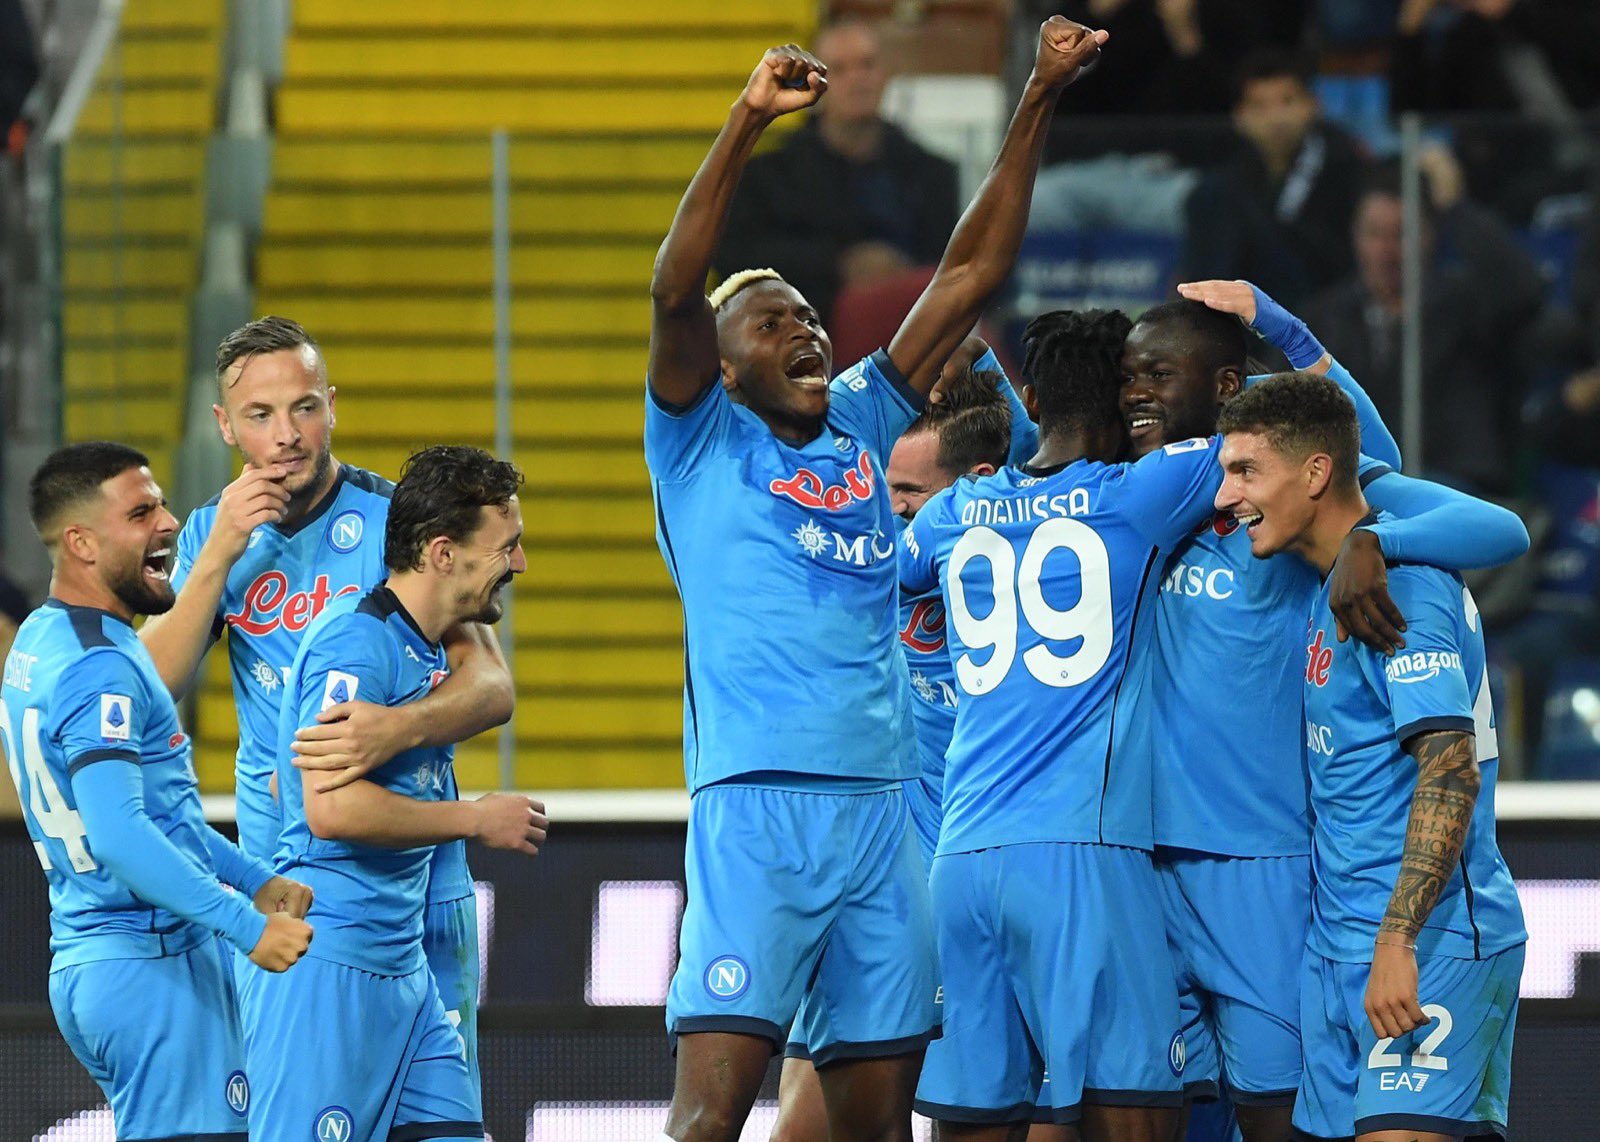 Football, tomorrow Napoli in Dimaro.  Koulibaly is coming too, Juve wants him: but 40 million is too many